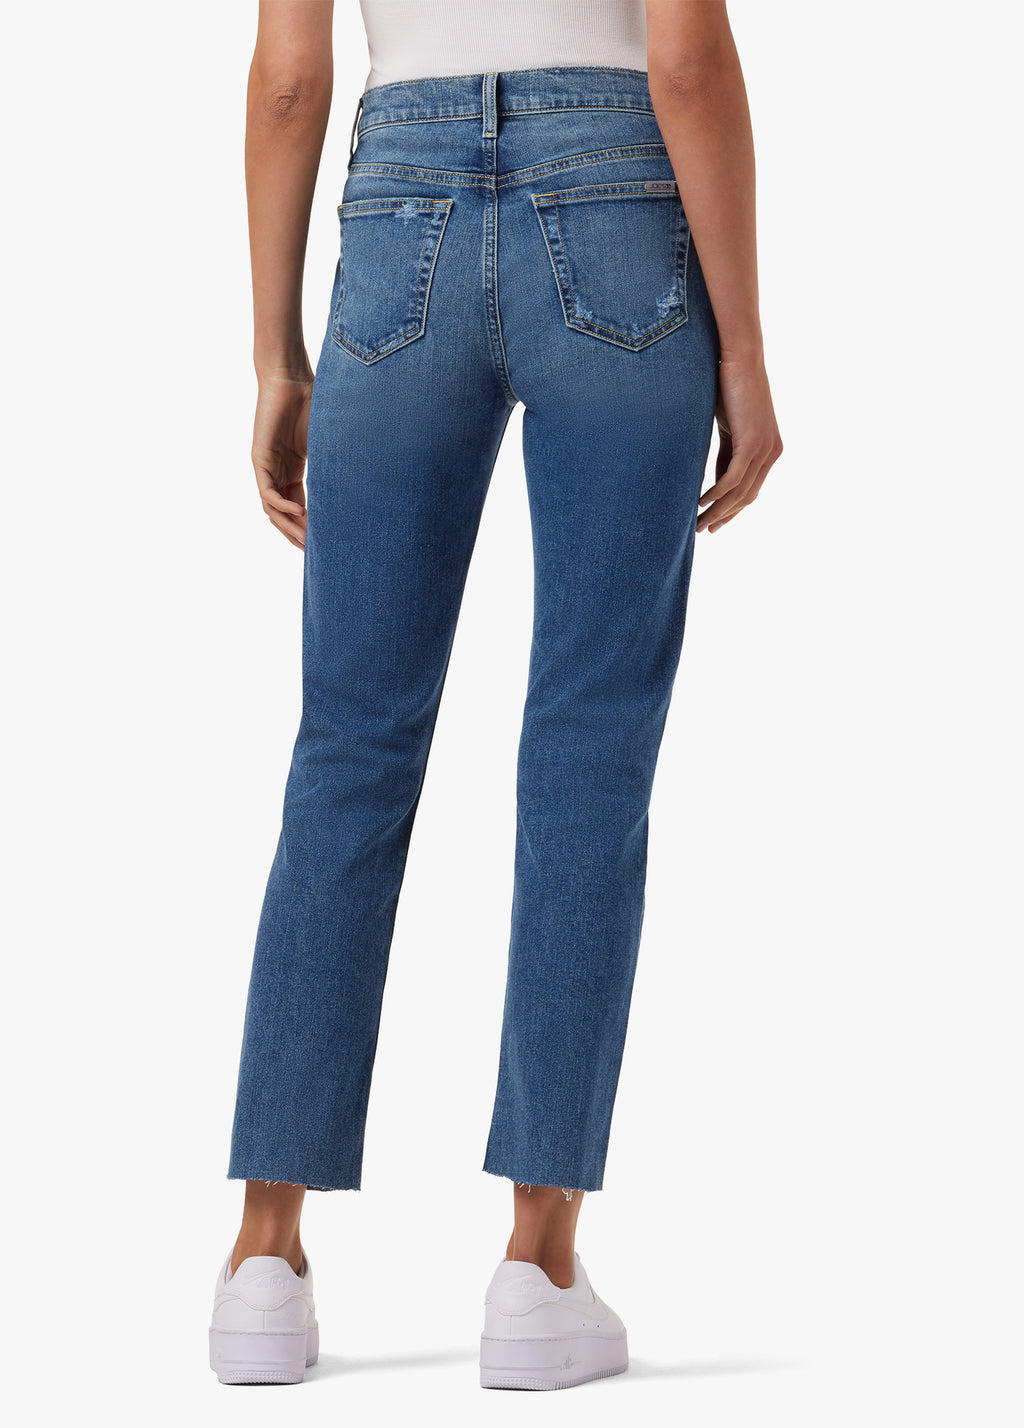 Joe's Jeans The Icon Ankle Mid Rise Skinny Fit Jeans | Dillard's